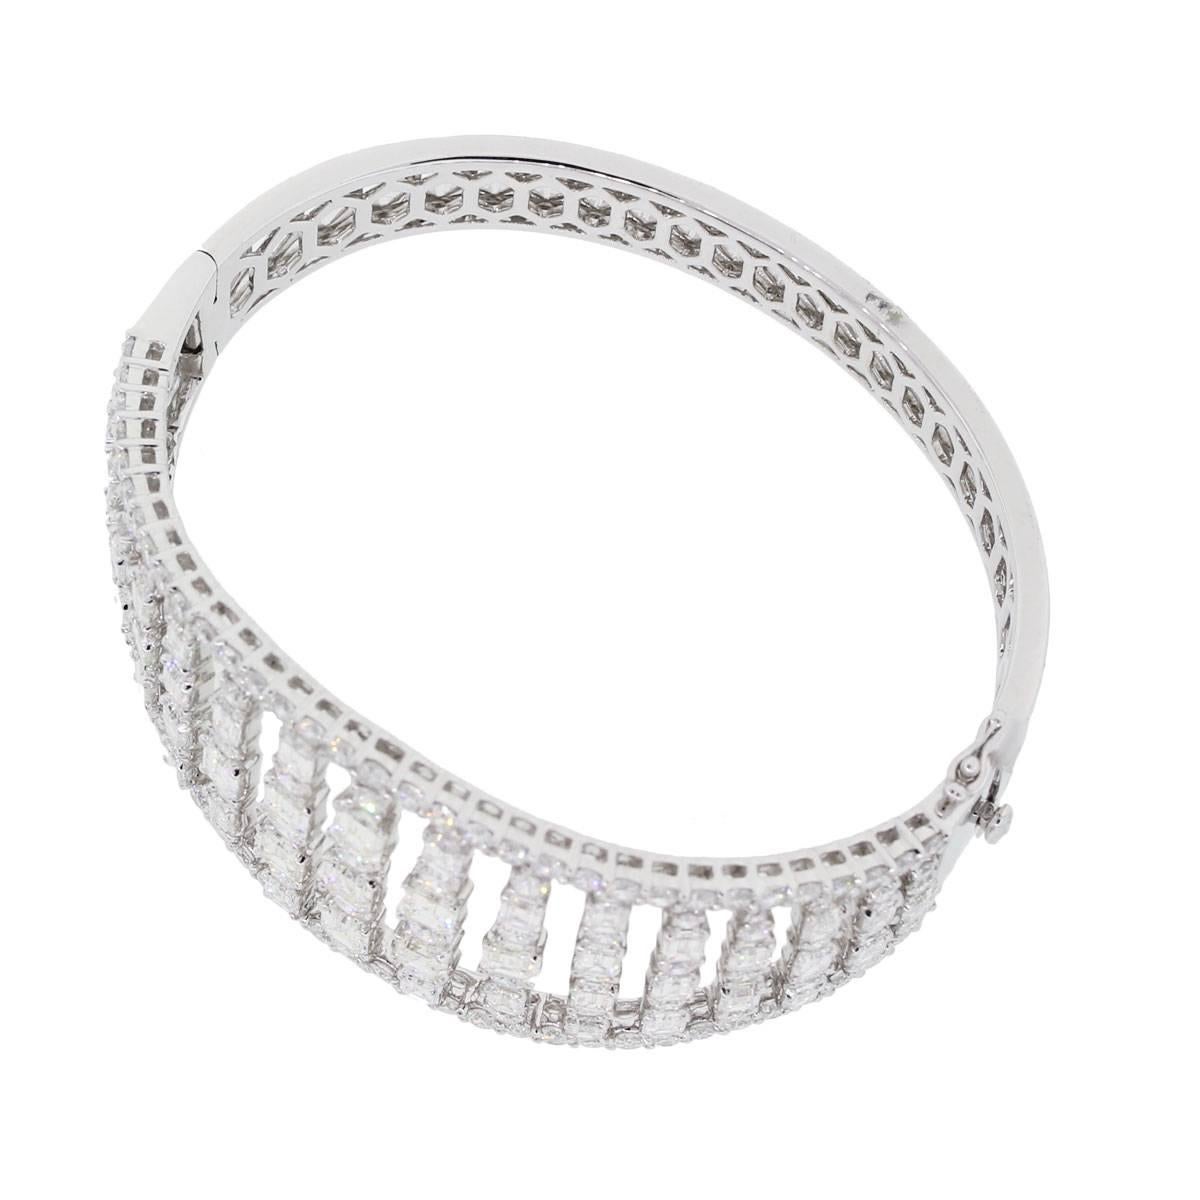 Material: 18k white gold
Diamond Details: Approximately 17.88ctw of baguette shape diamonds and round brilliant diamonds. Diamonds are G/H in color and VS in clarity
Clasp: Tongue in box clasp with safety latch
Total Weight: 50.6g